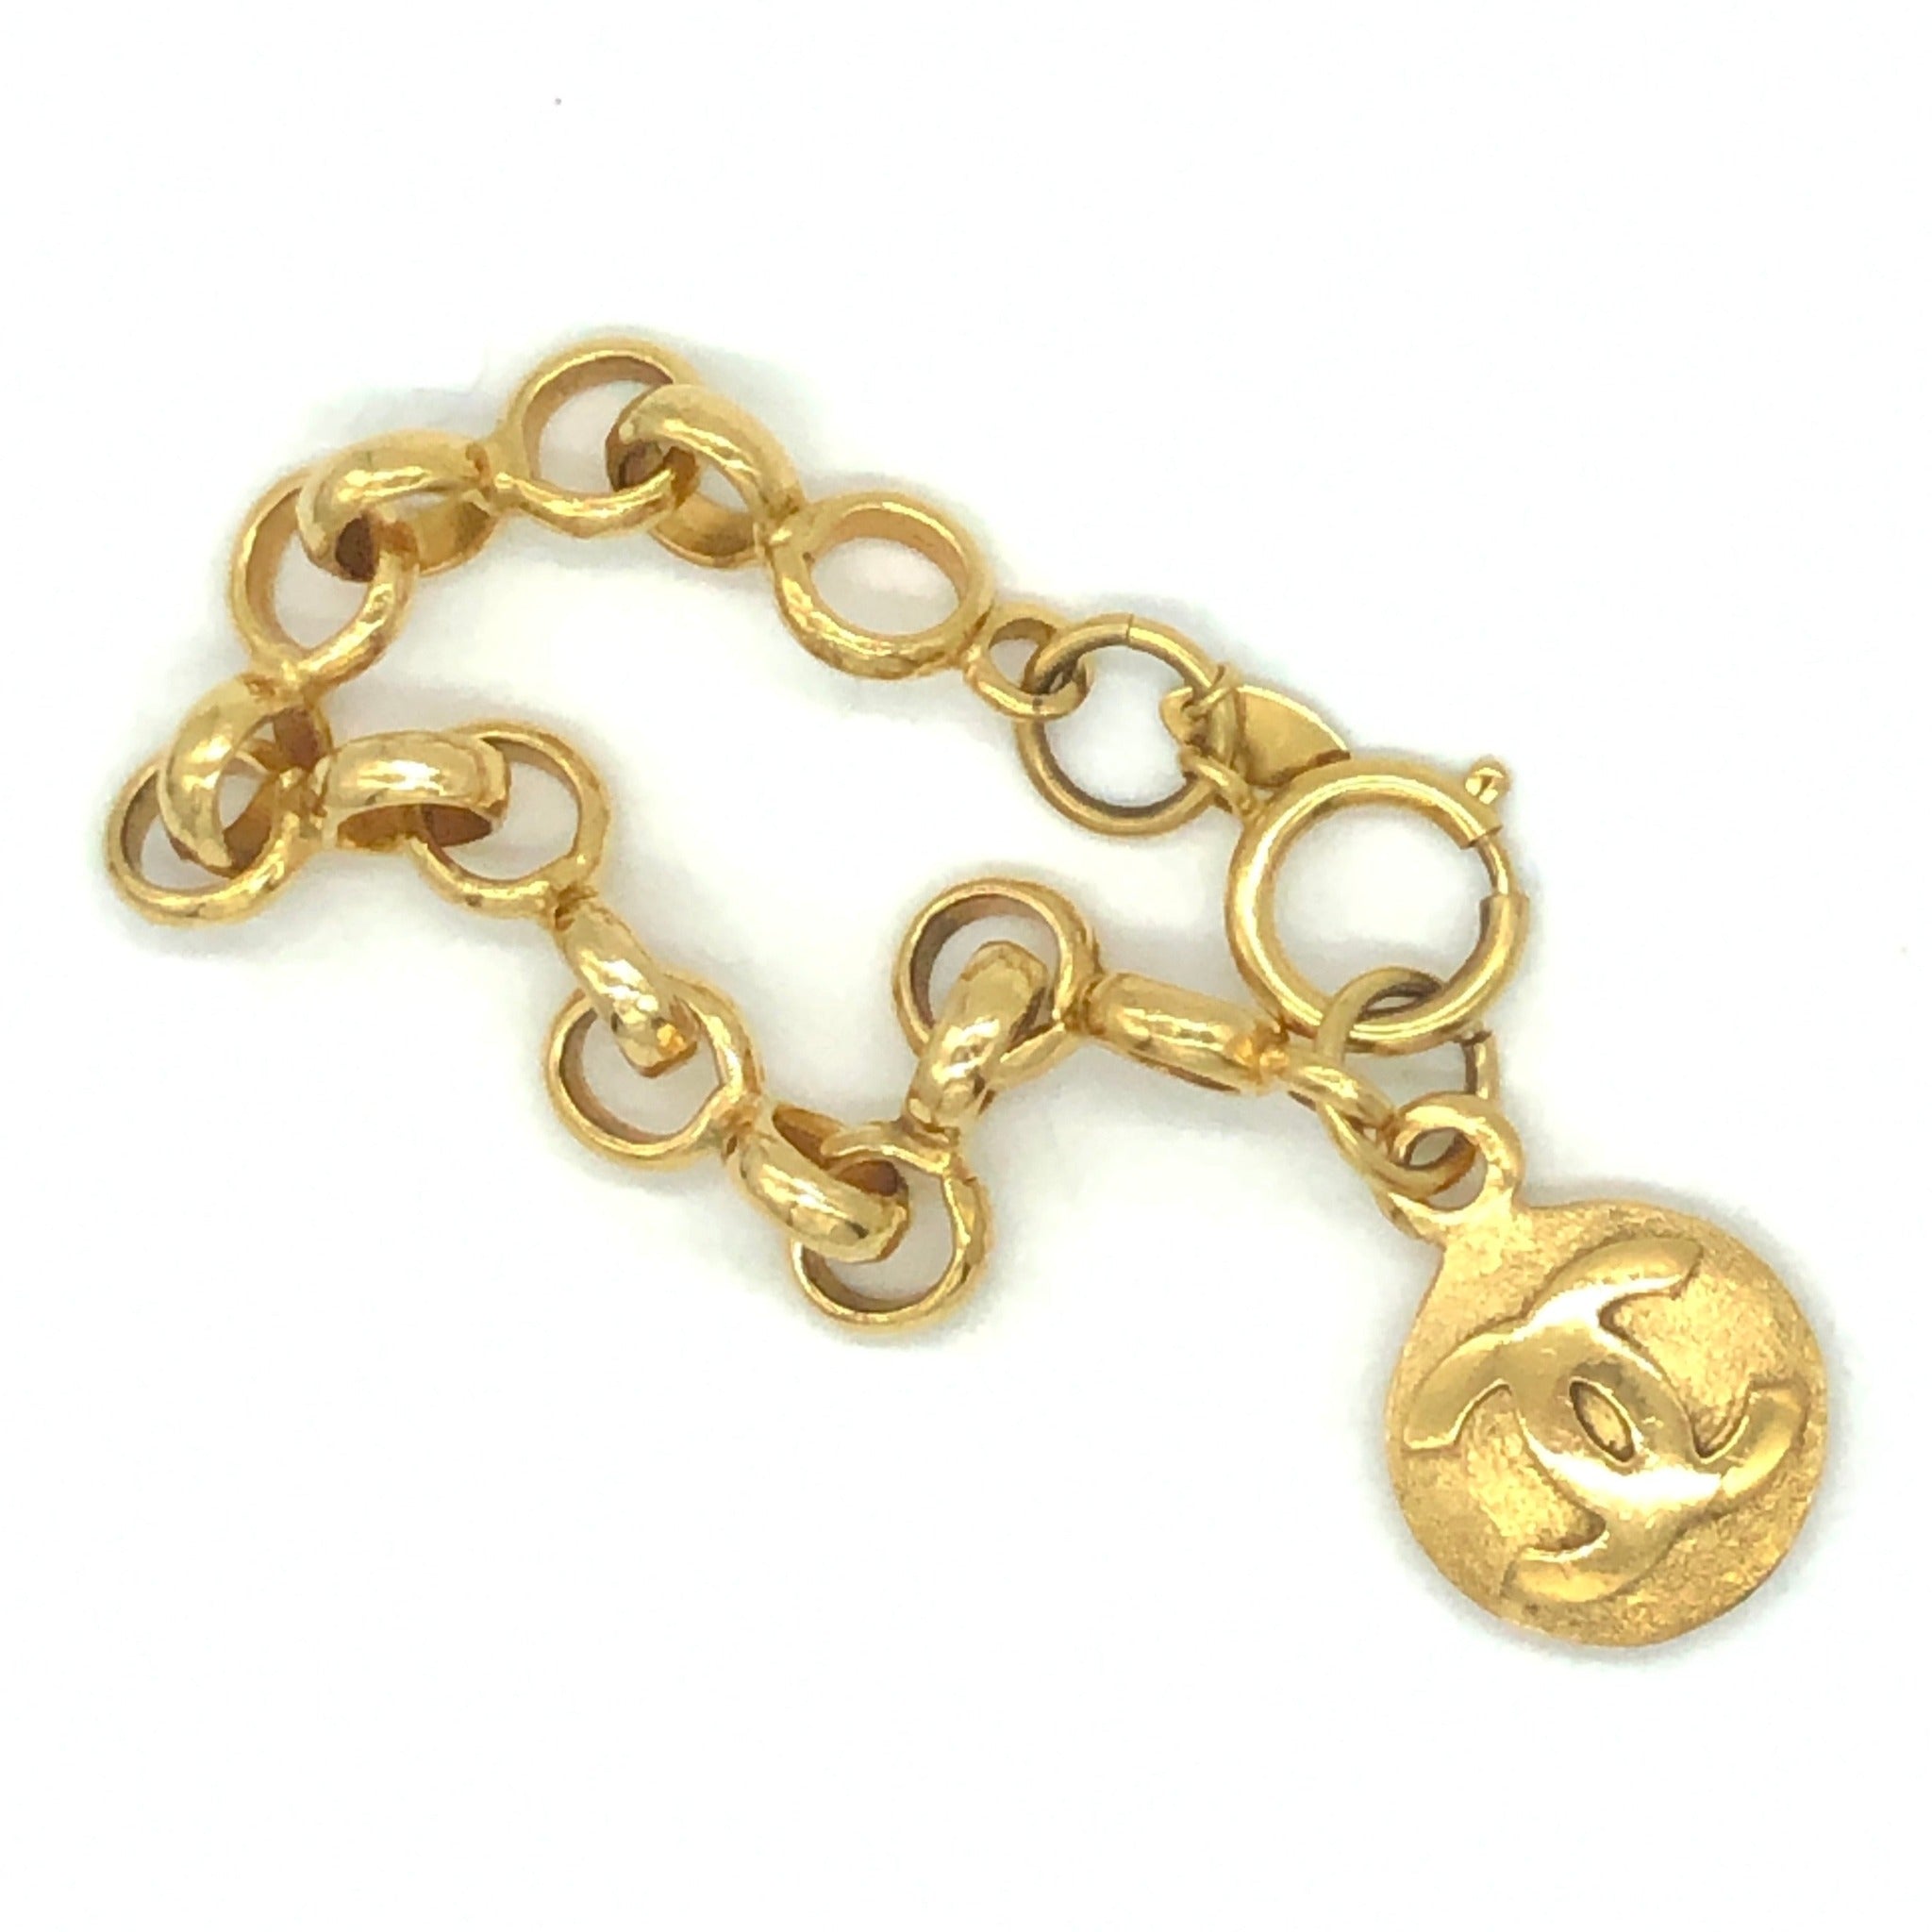 Lot - Chanel gold hinged bangle bracelet with embossed C.H.A.N.E.L. and a  safety chain, signed 'Chanel Made In France,' 1980s.